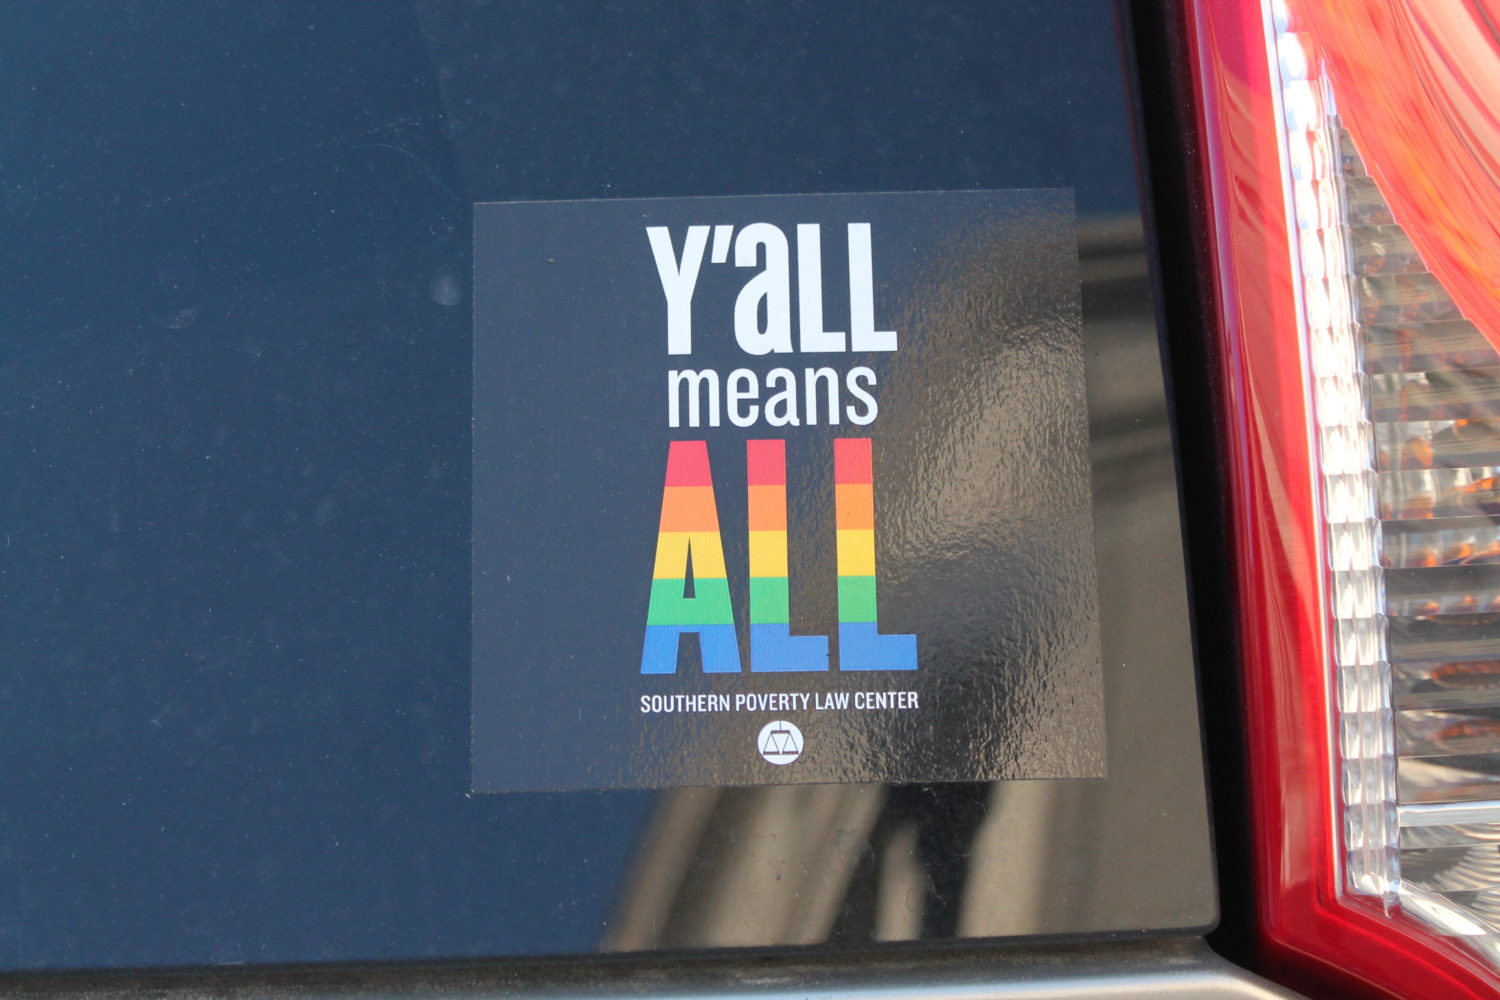 An image shows a sticker in the back of the car with the text "Y'all means all." The word "all" appears in rainbow colors.